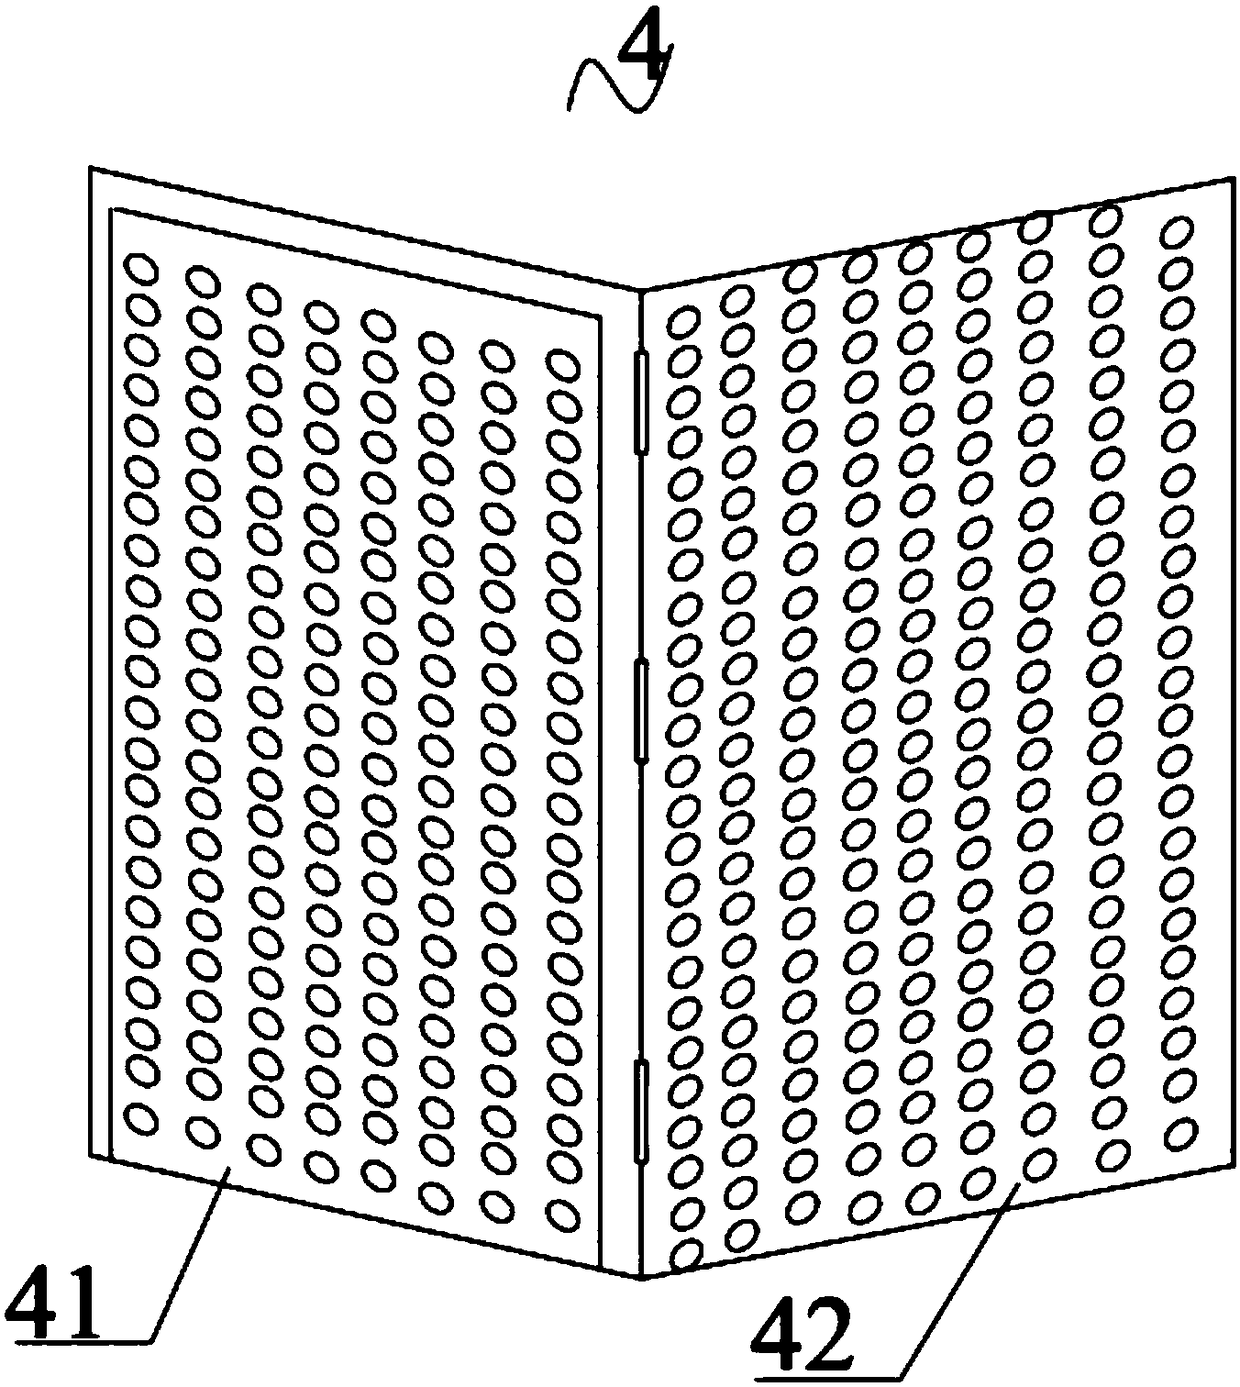 Honeycomb water storage tank capable of efficiently purifying stored water